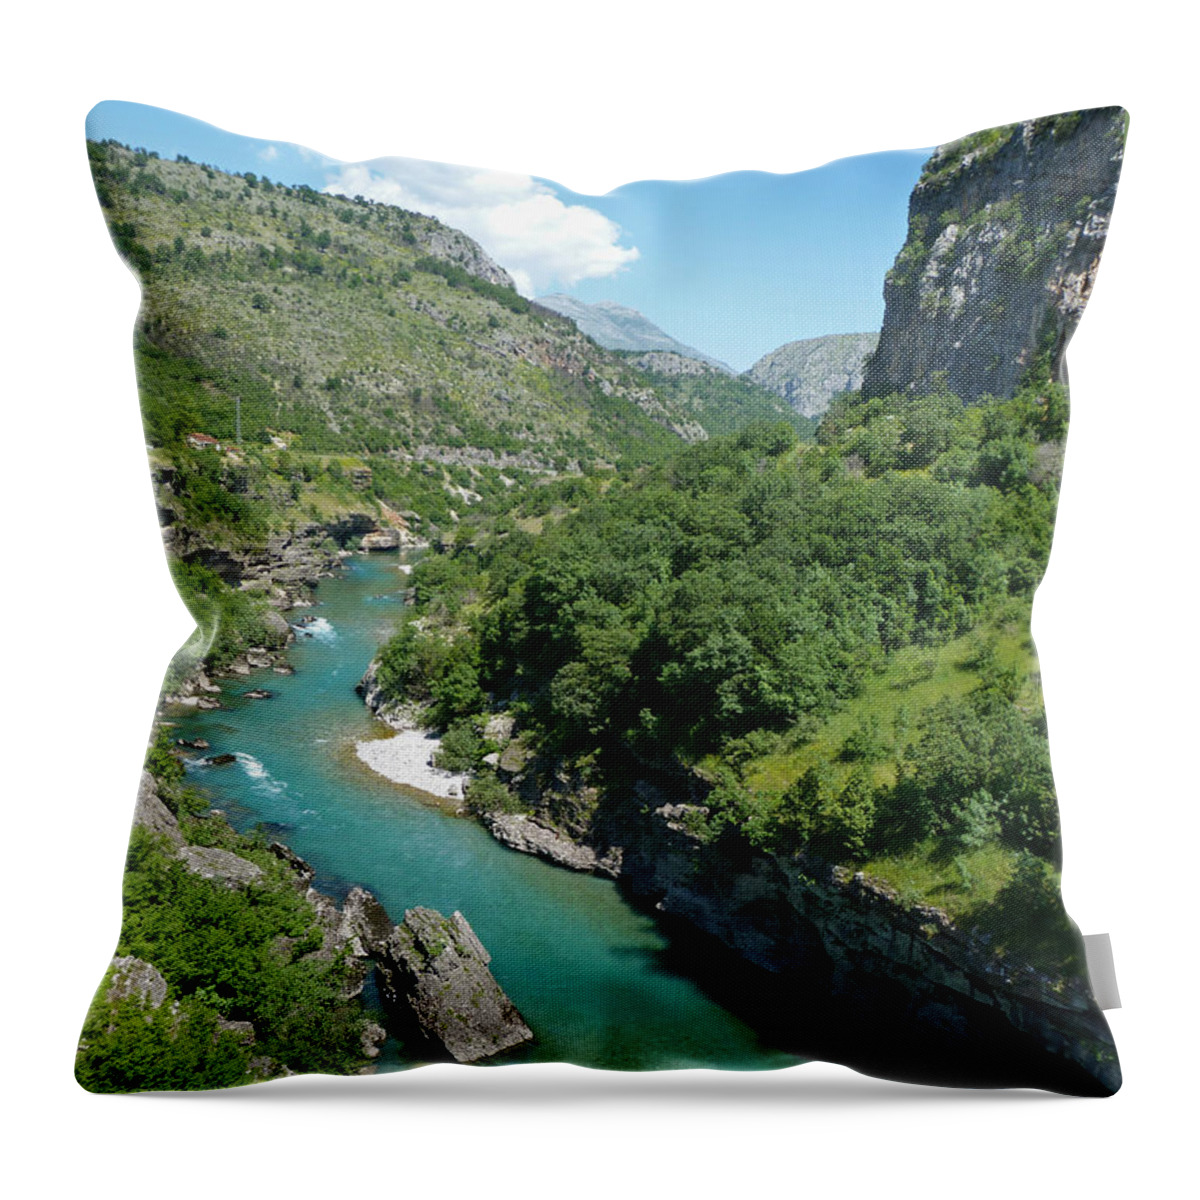 Moraca River Throw Pillow featuring the photograph Moraca River - Montenegro by Phil Banks